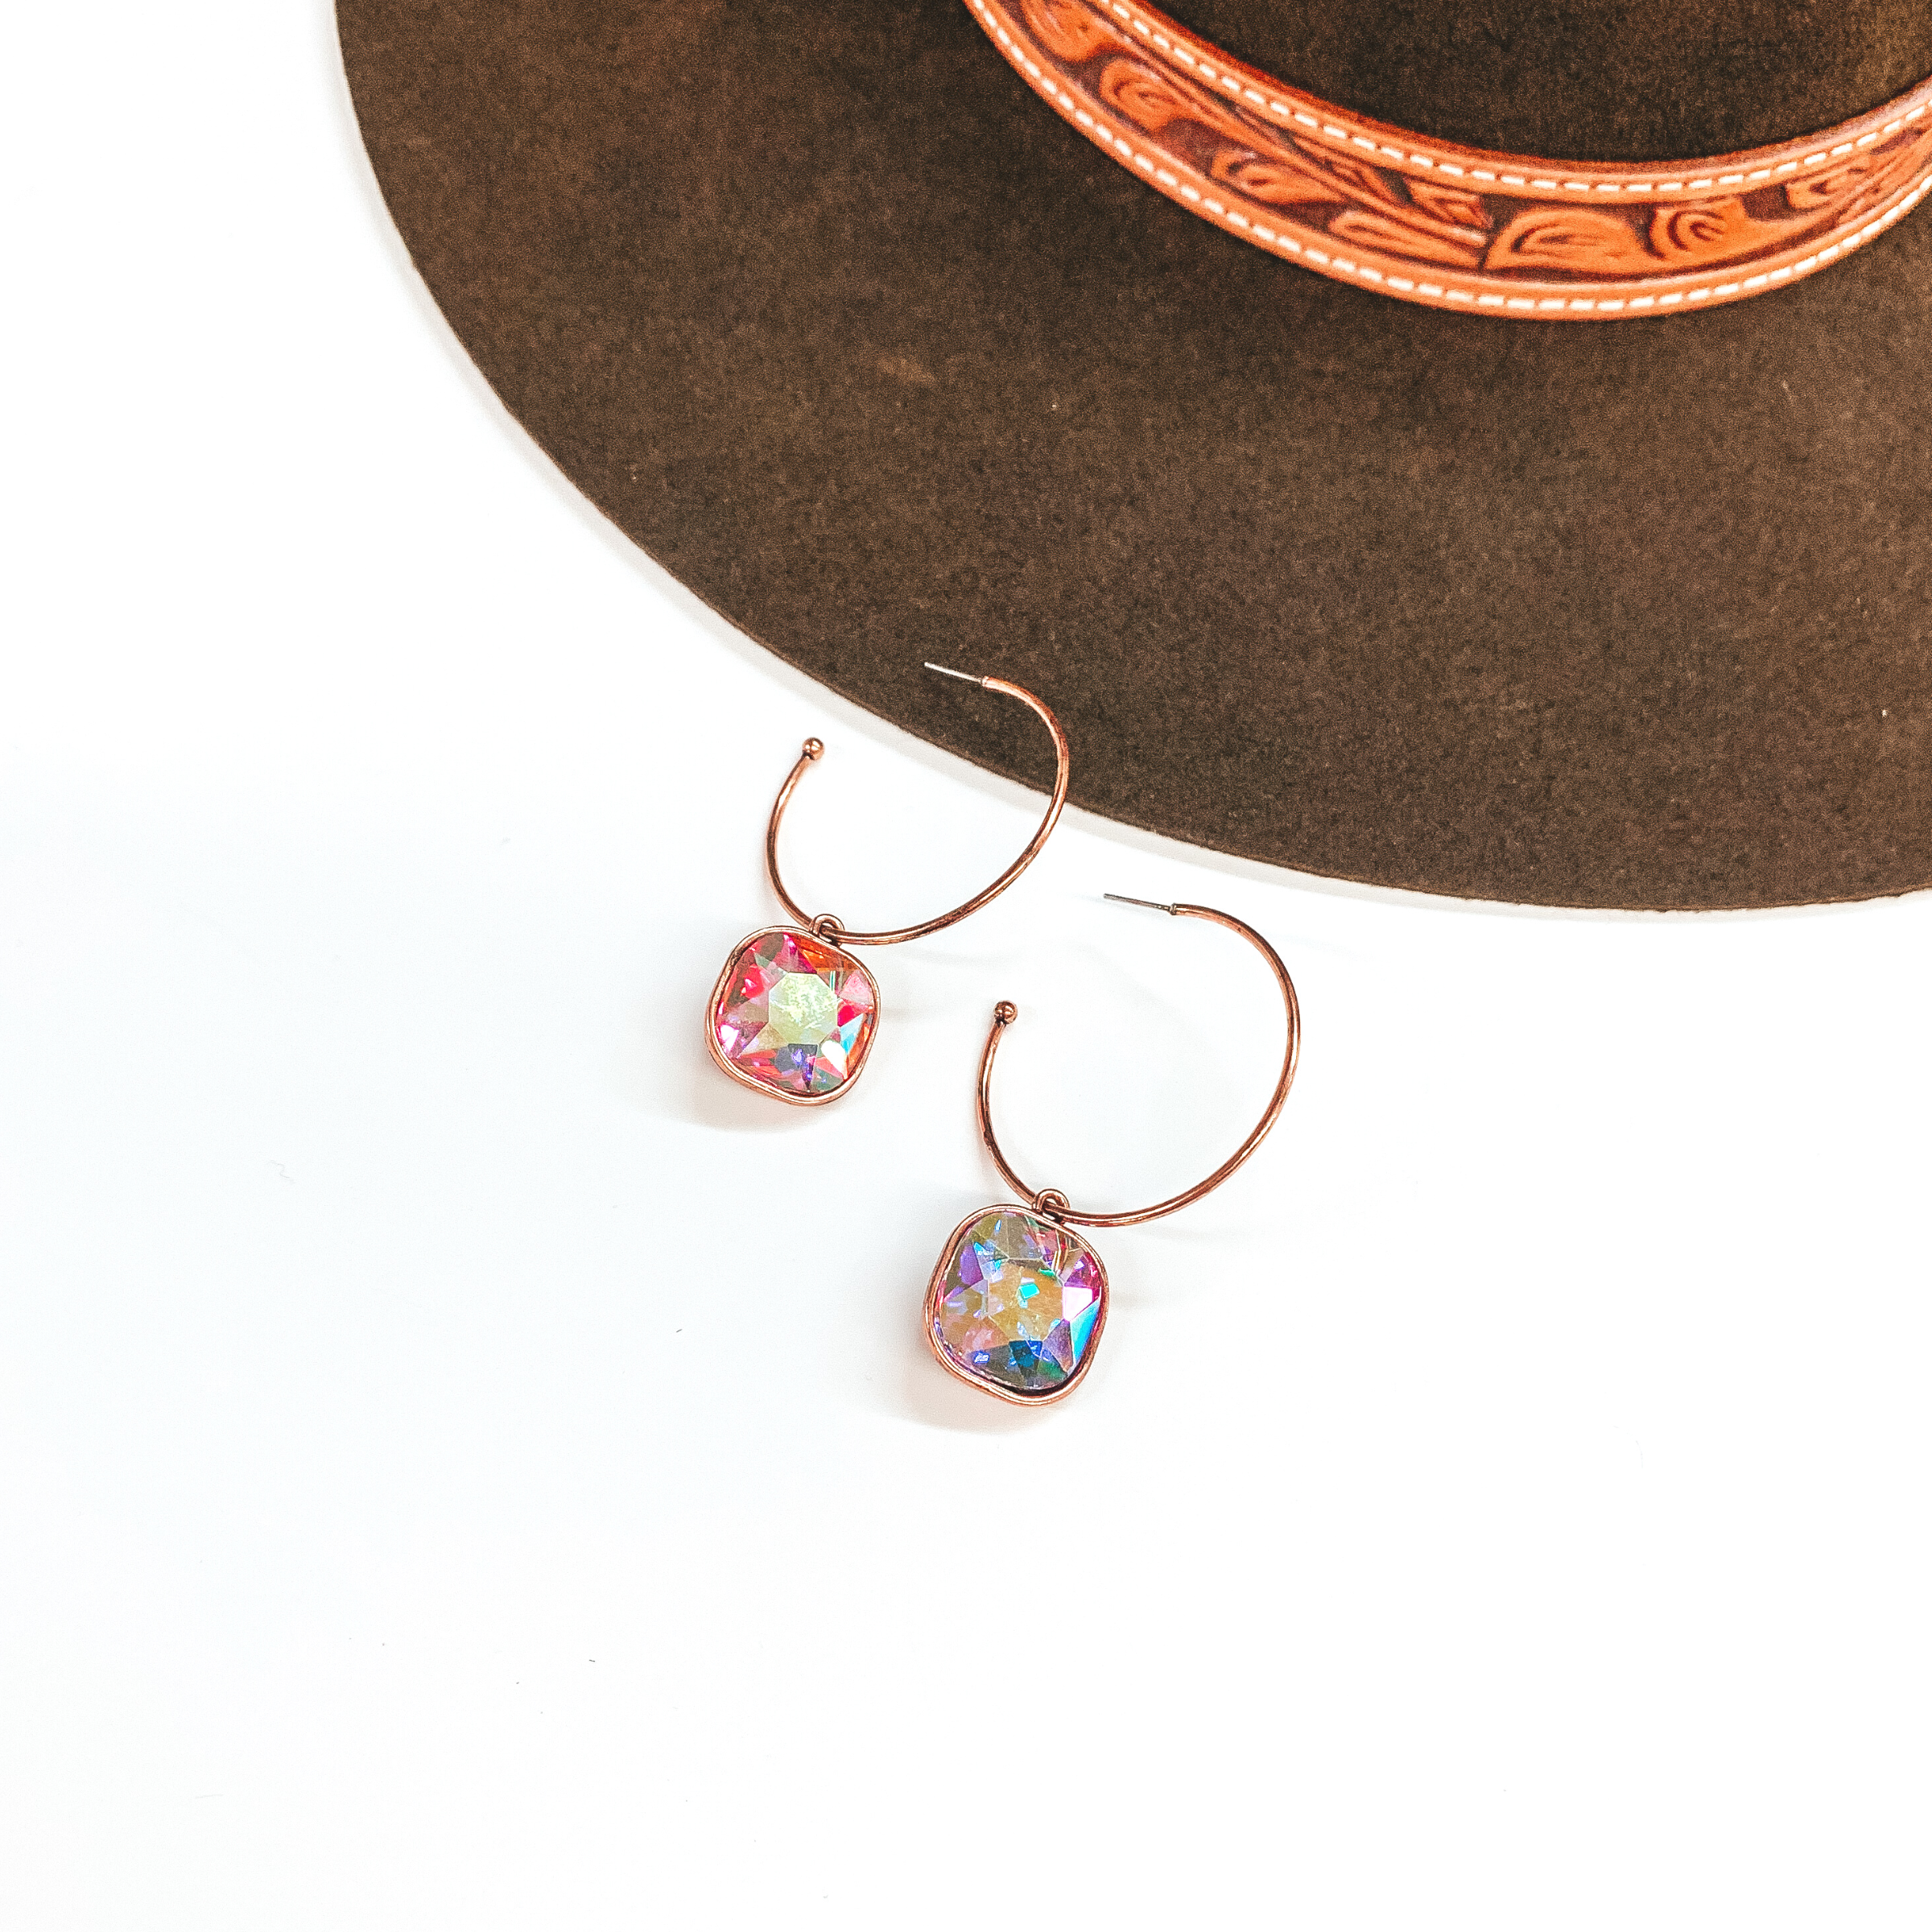 These are copper open ended hoop earrings with  a cushion cut AB crystal hanging pendant. These  earrings are taken on a white background and a dark  brown hat in the back as decor.